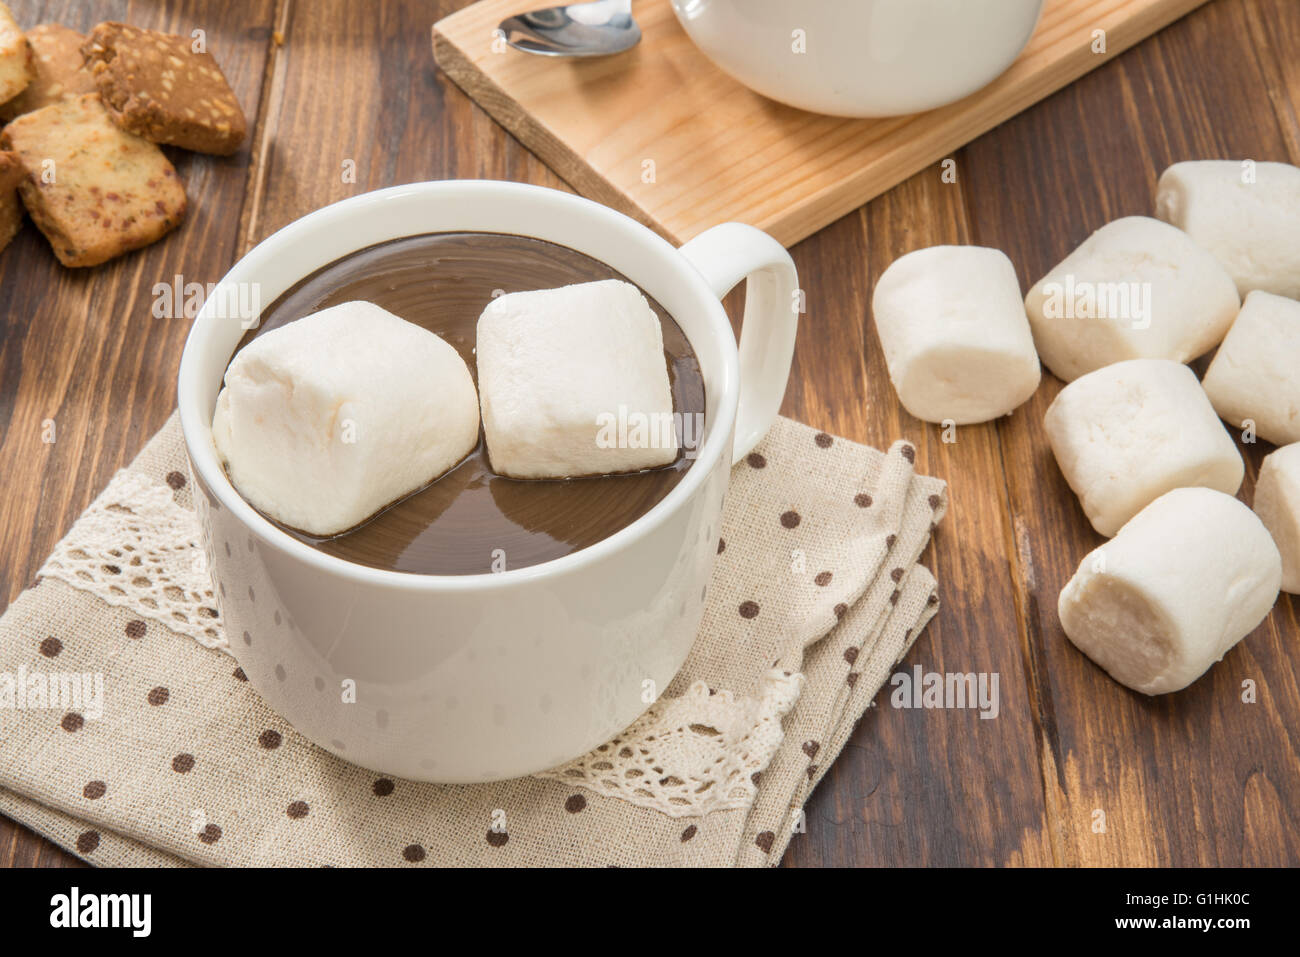 Mug filled with homemade hot chocolate and marshmallow, cookies on wooden table Stock Photo